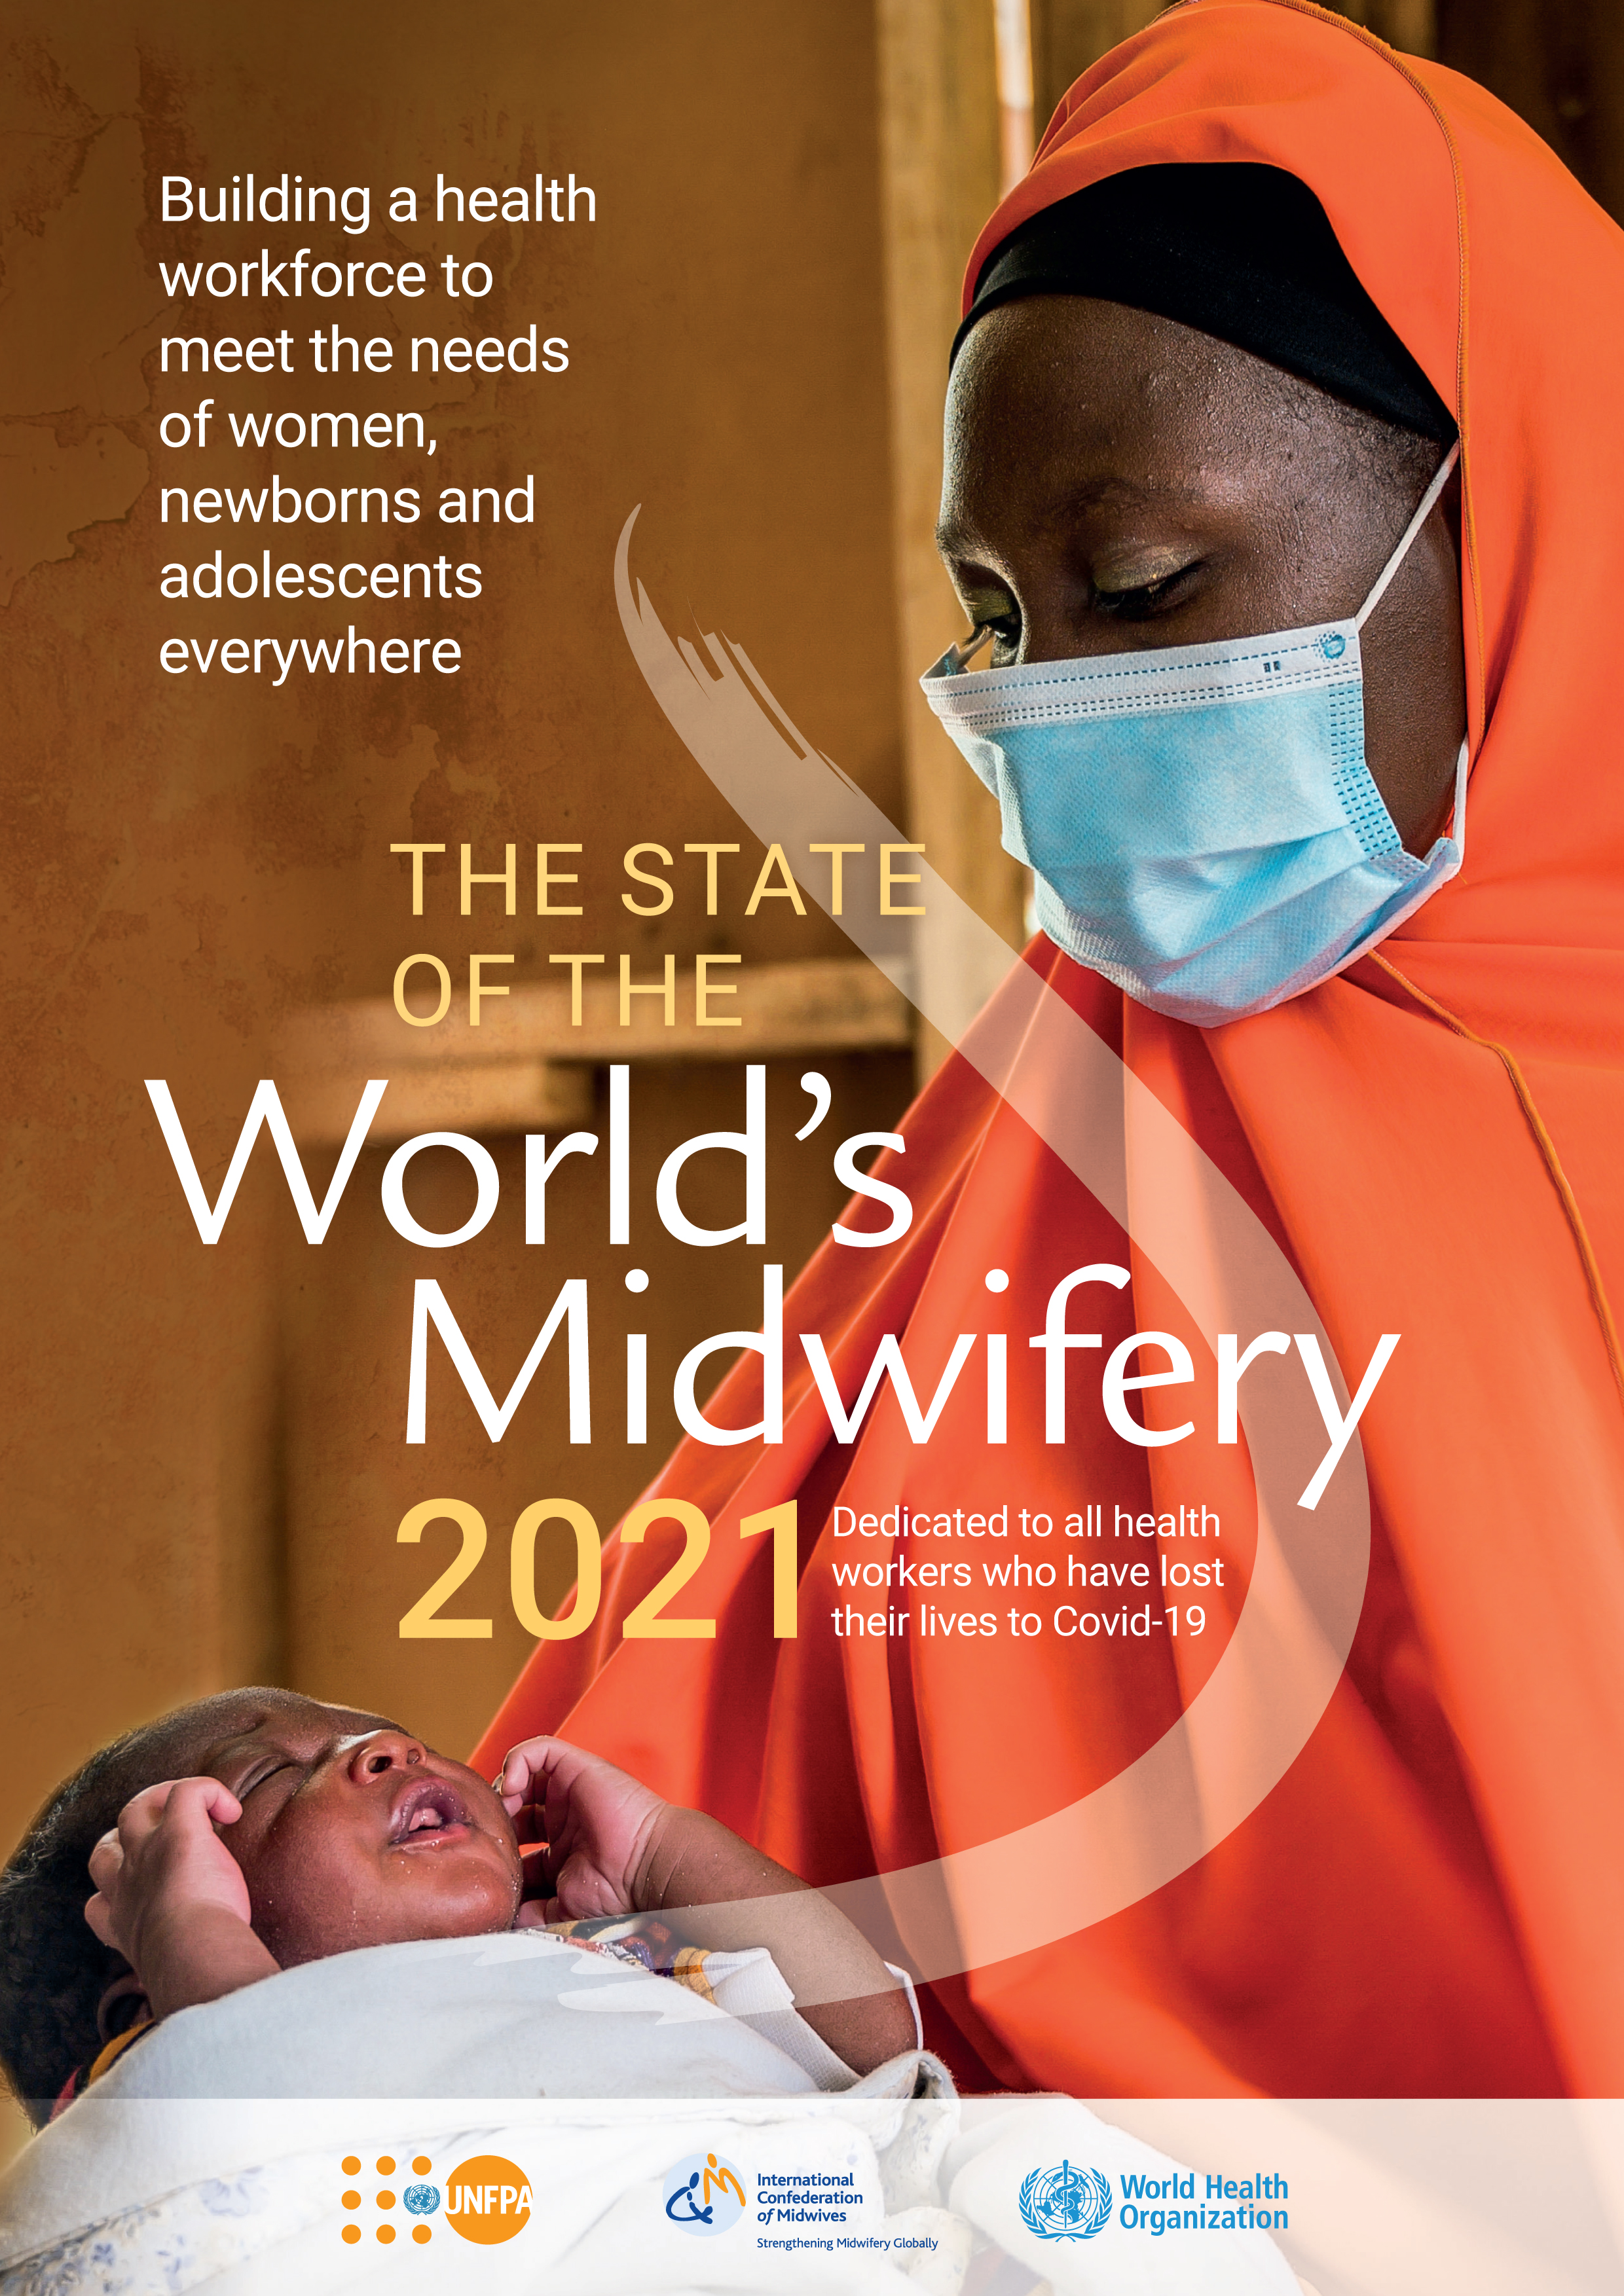 image of The State of the World's Midwifery 2021